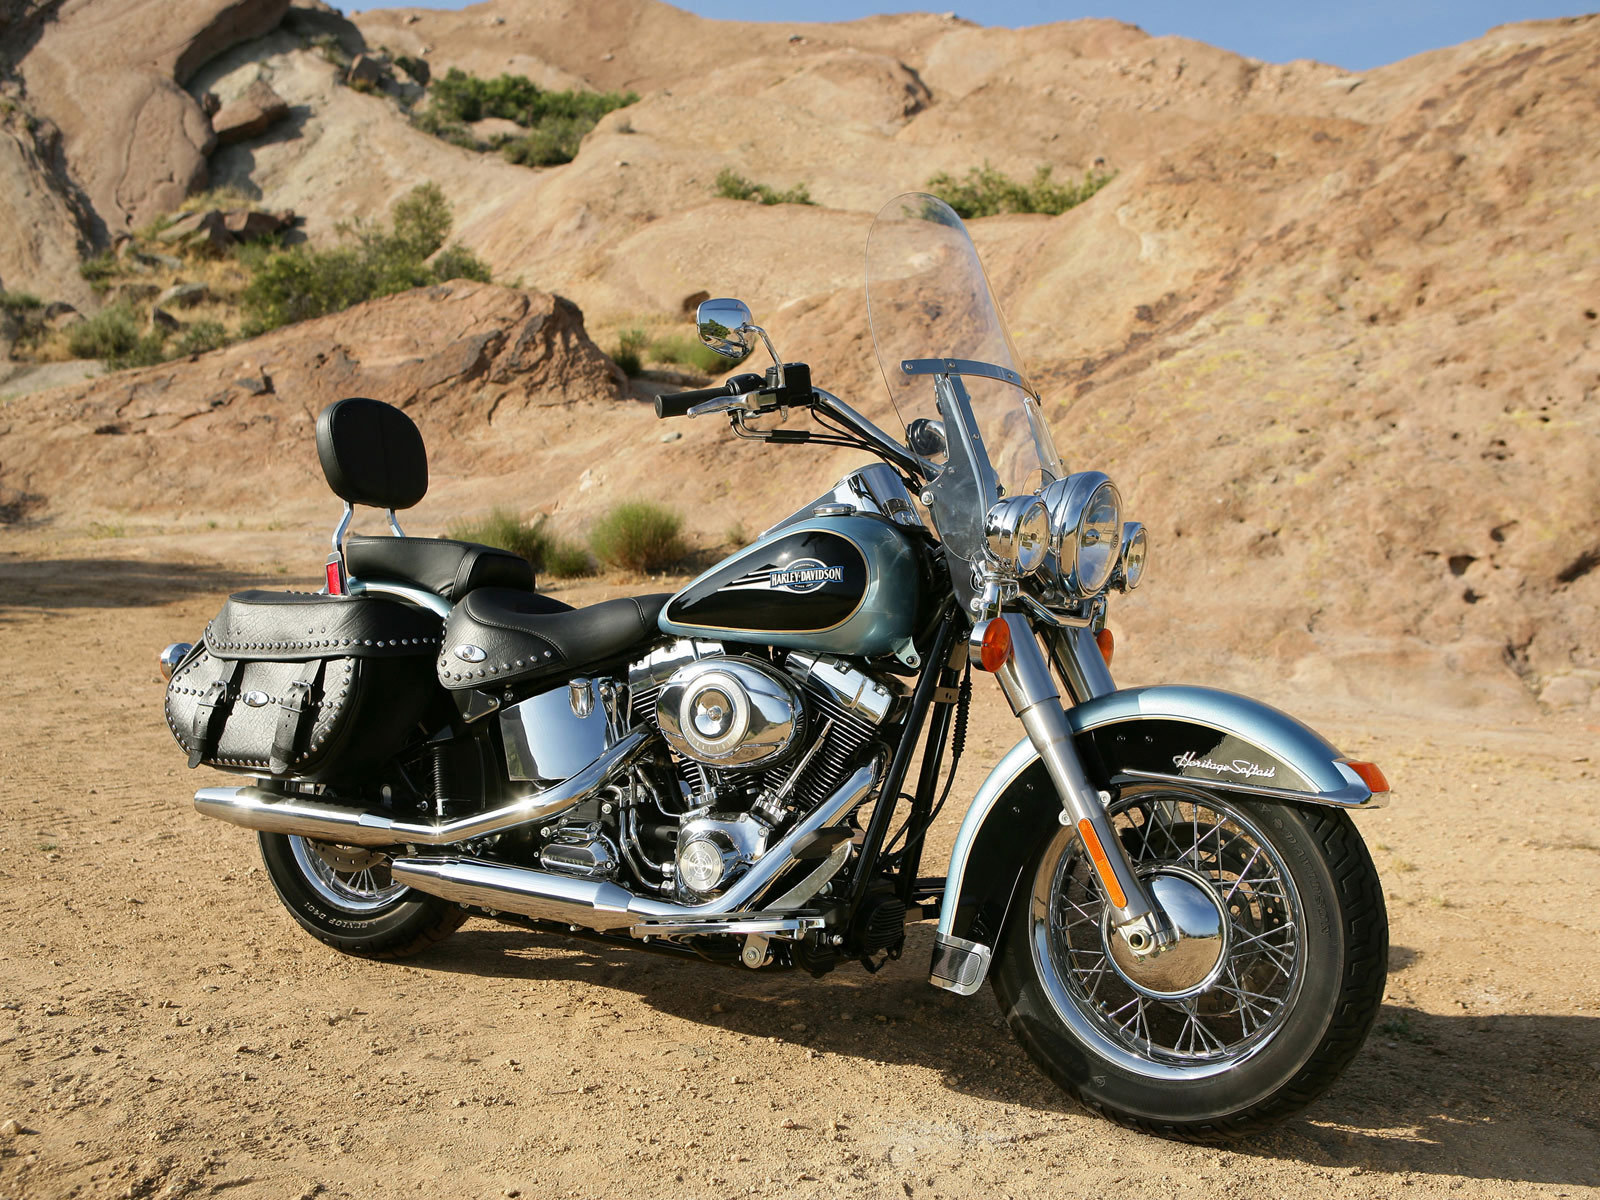 Harley Davidson Heritage Softail Wallpaper And Background Image 1600x1200